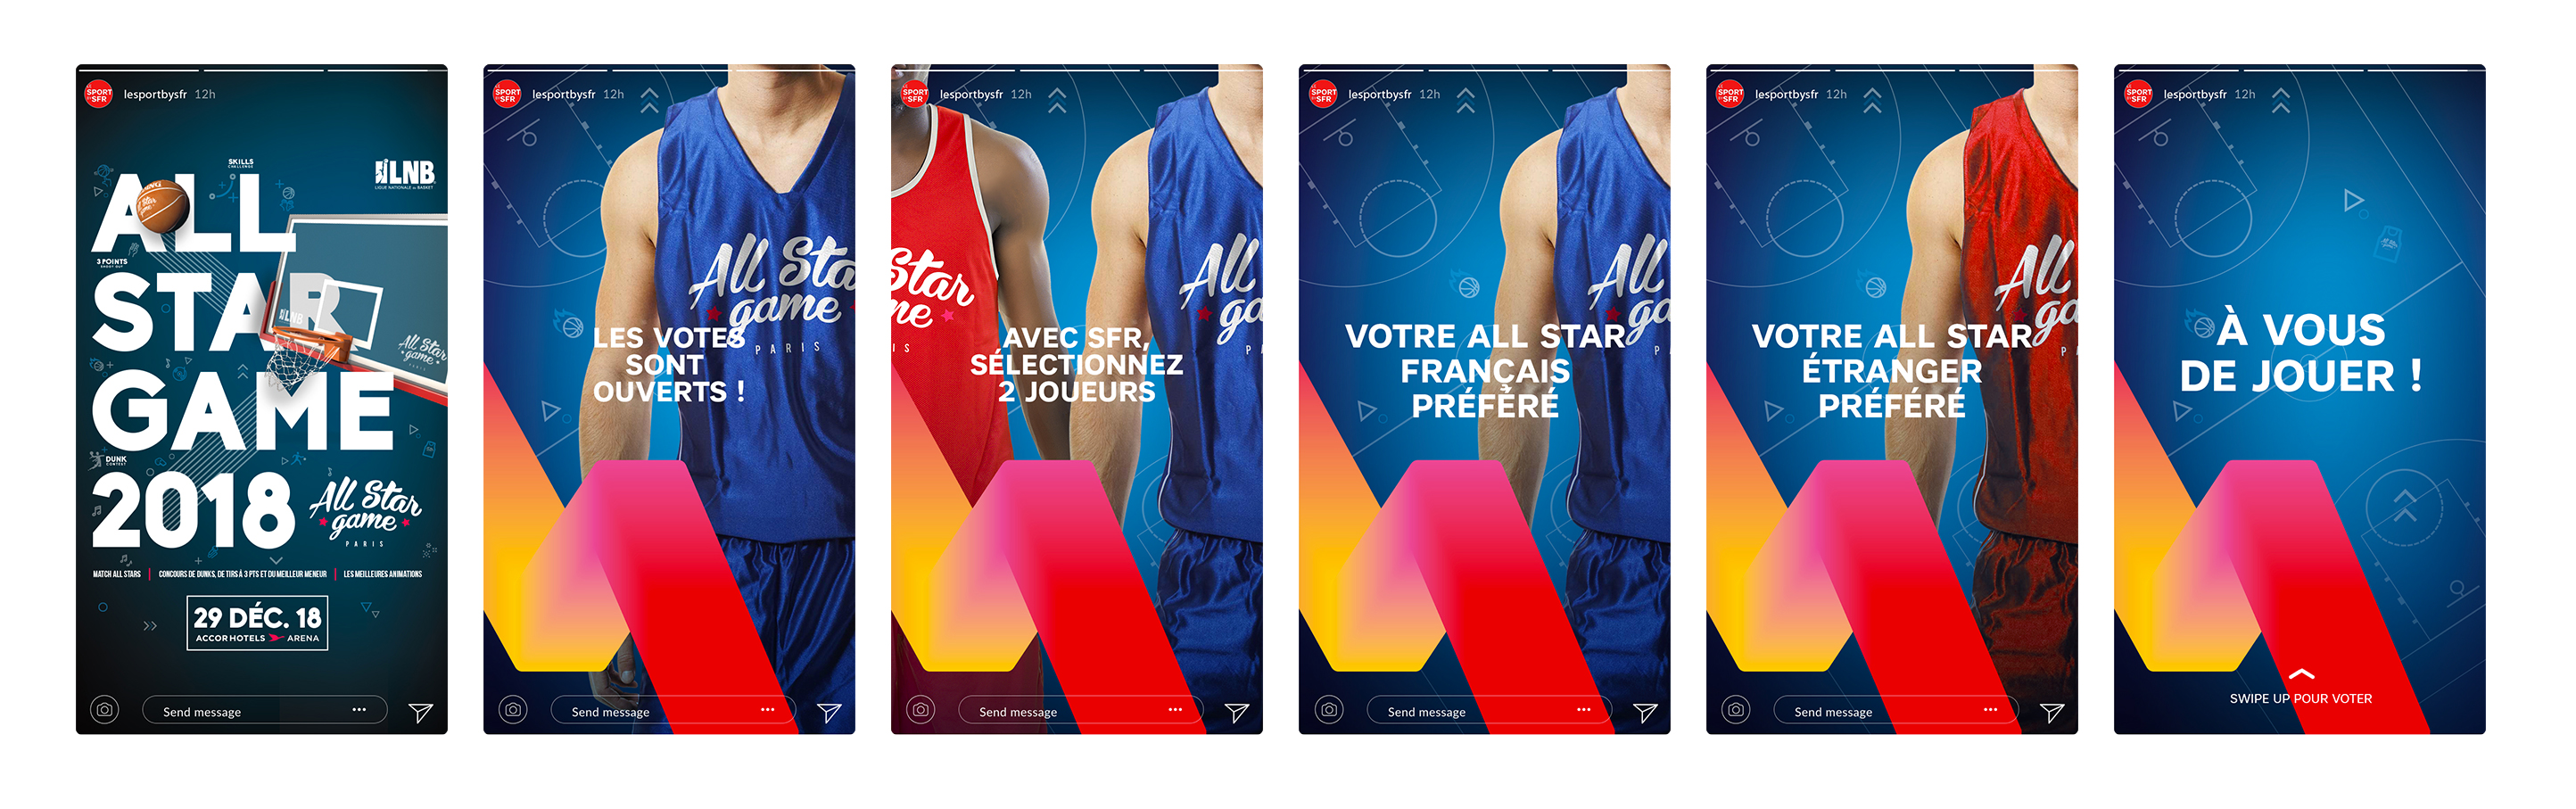 MOCKUP_STORIES_SFR_ELECTION_EQUIPE